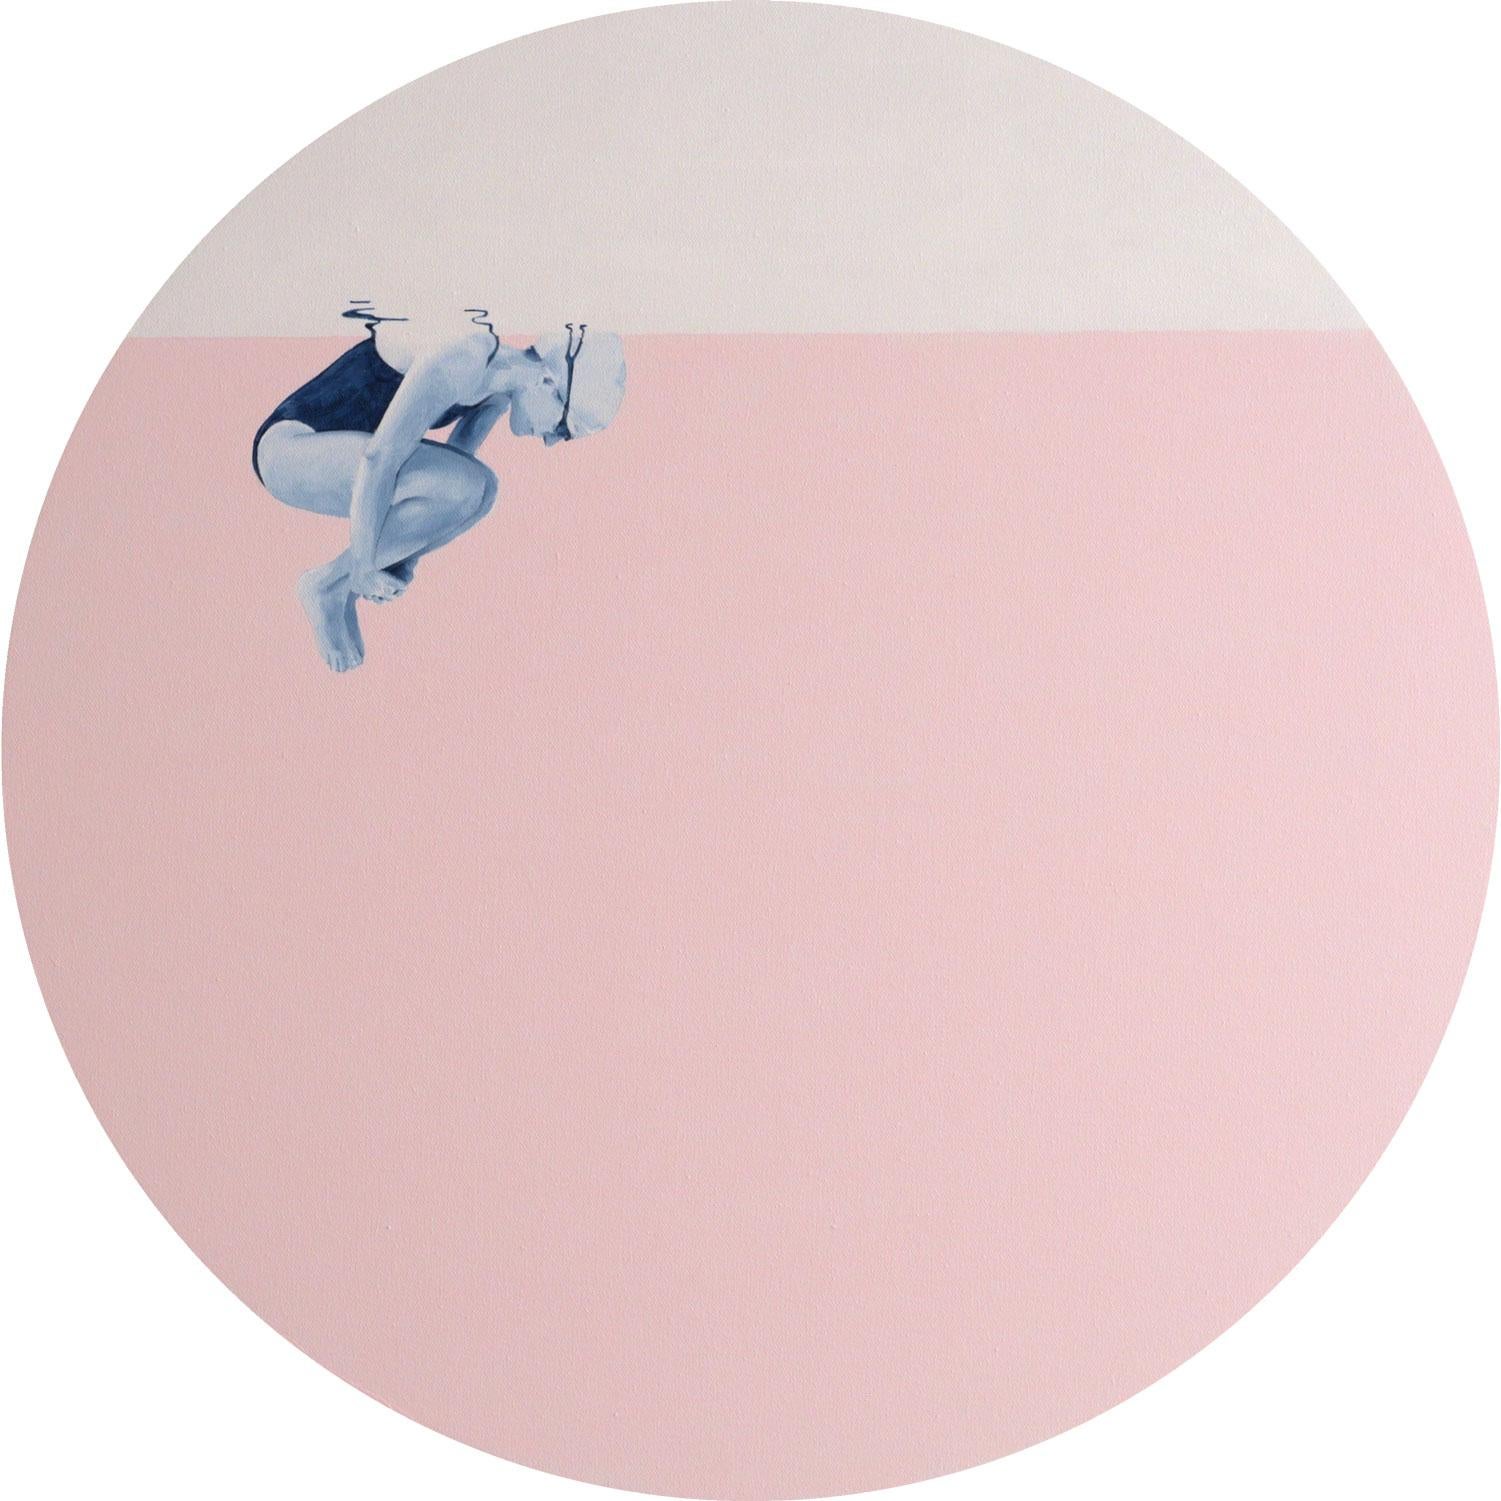 Floating in pink II - figurative painting, landscape painting - Minimalist Painting by Ana Patitu